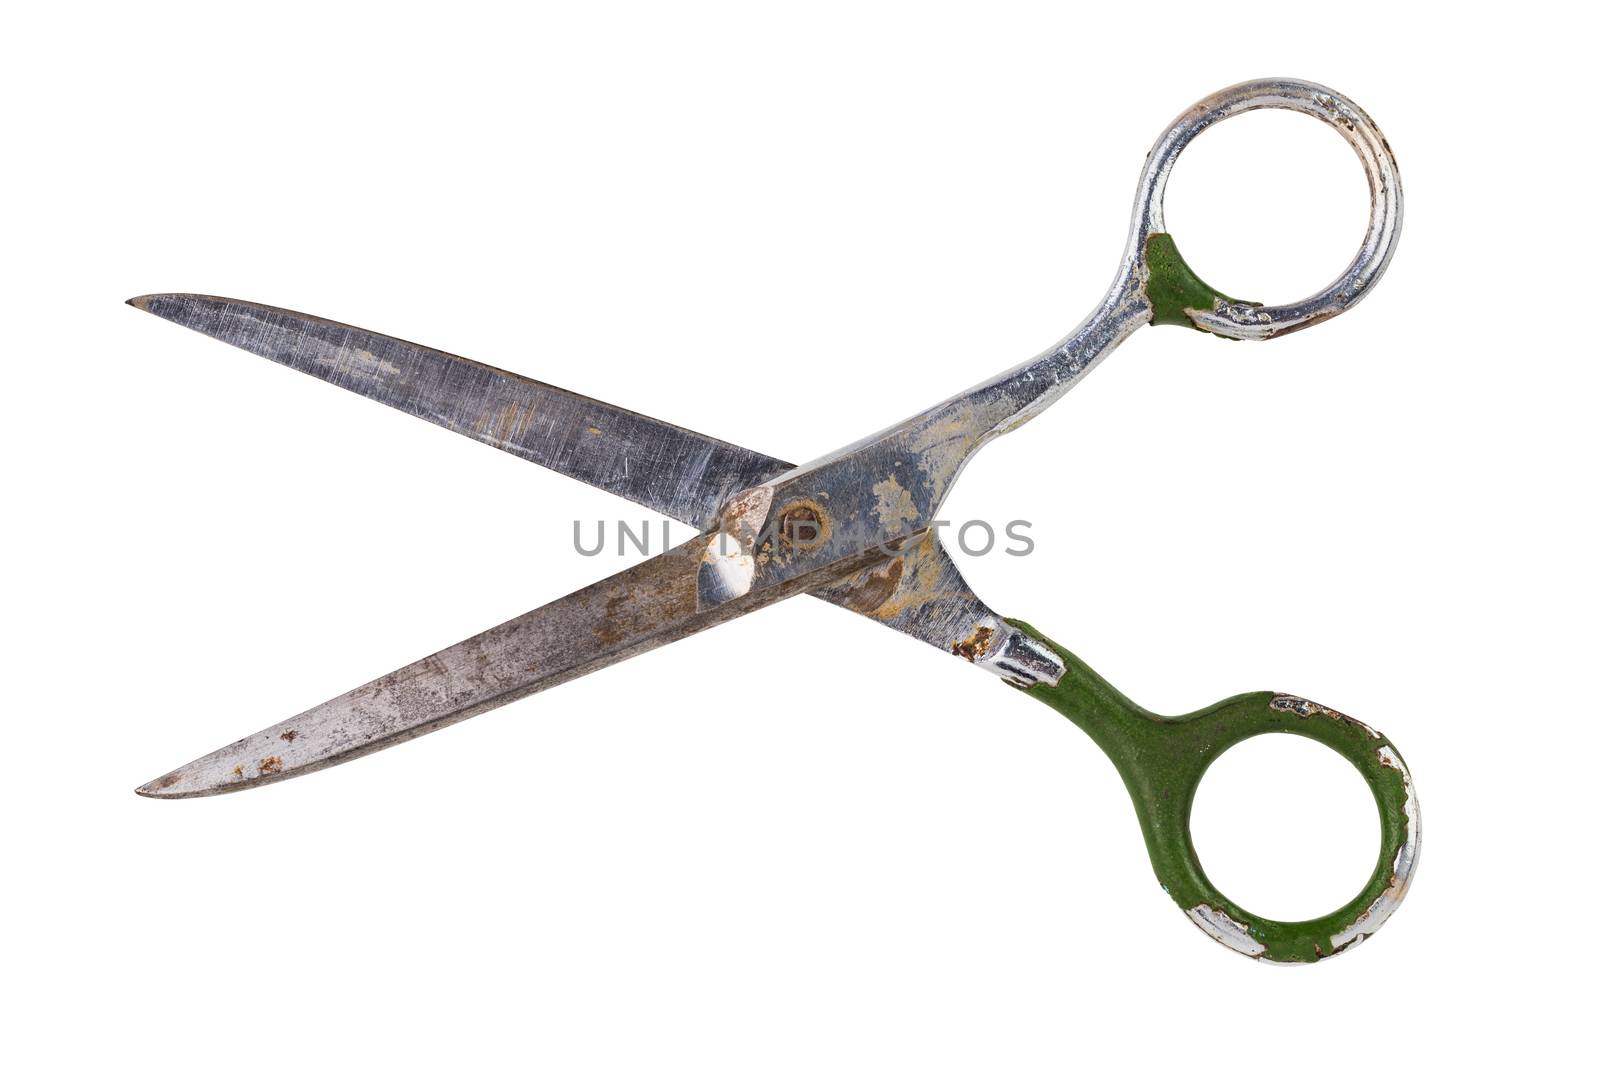 Single old soviet scissors isolated on white background. Opened. by z1b